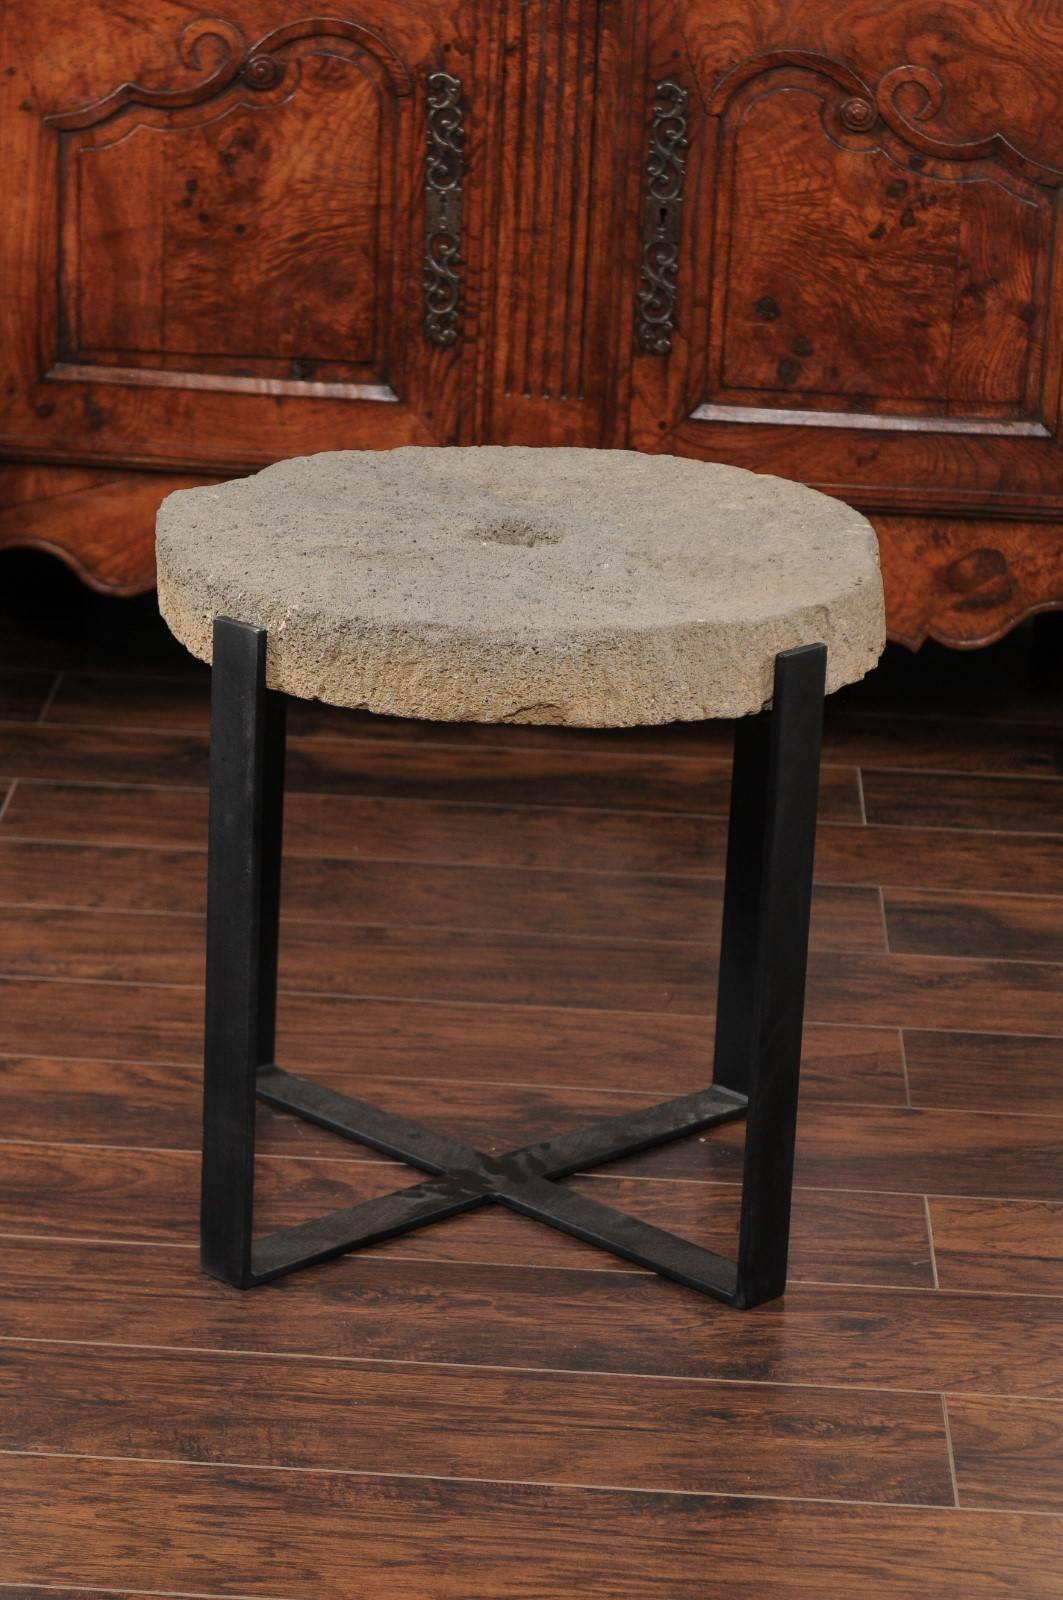 Large Drink Table Made of 1920s Millstone Top Mounted on a New Black Iron Base 1